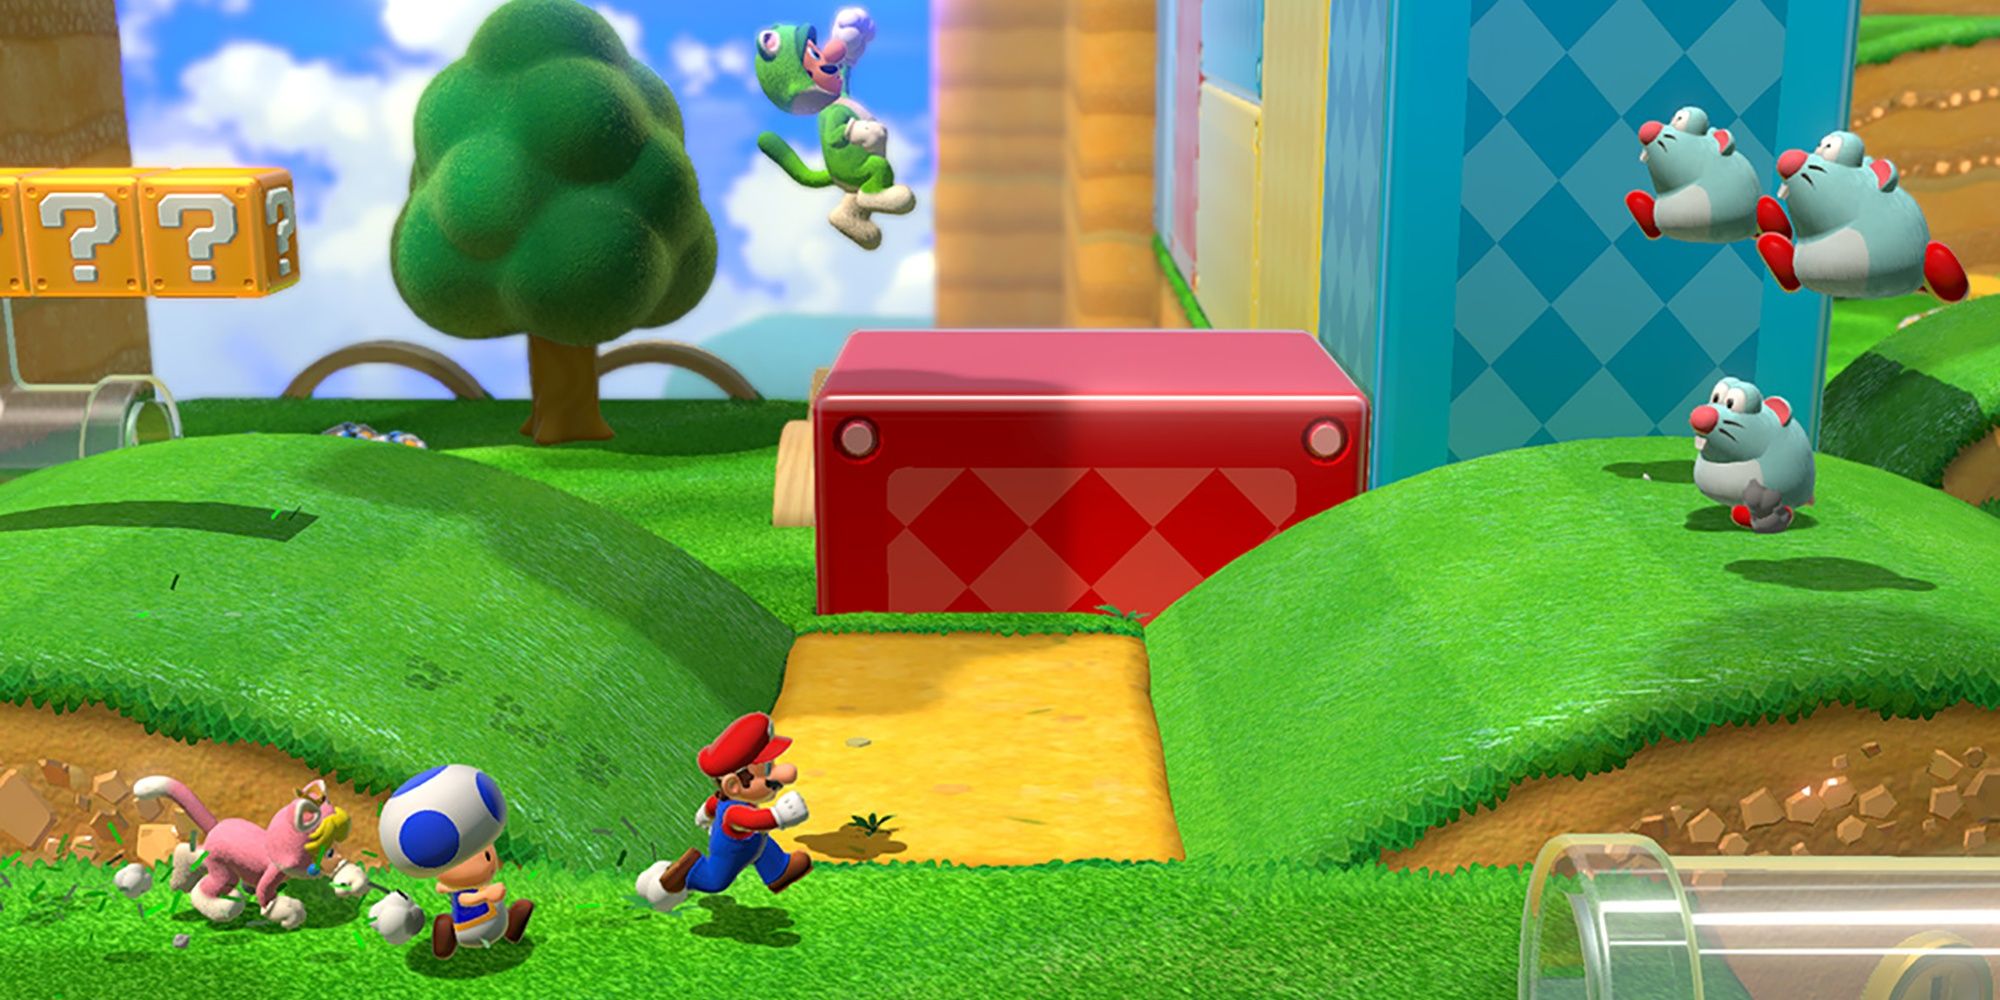 Four player co-op in Super Mario 3D World